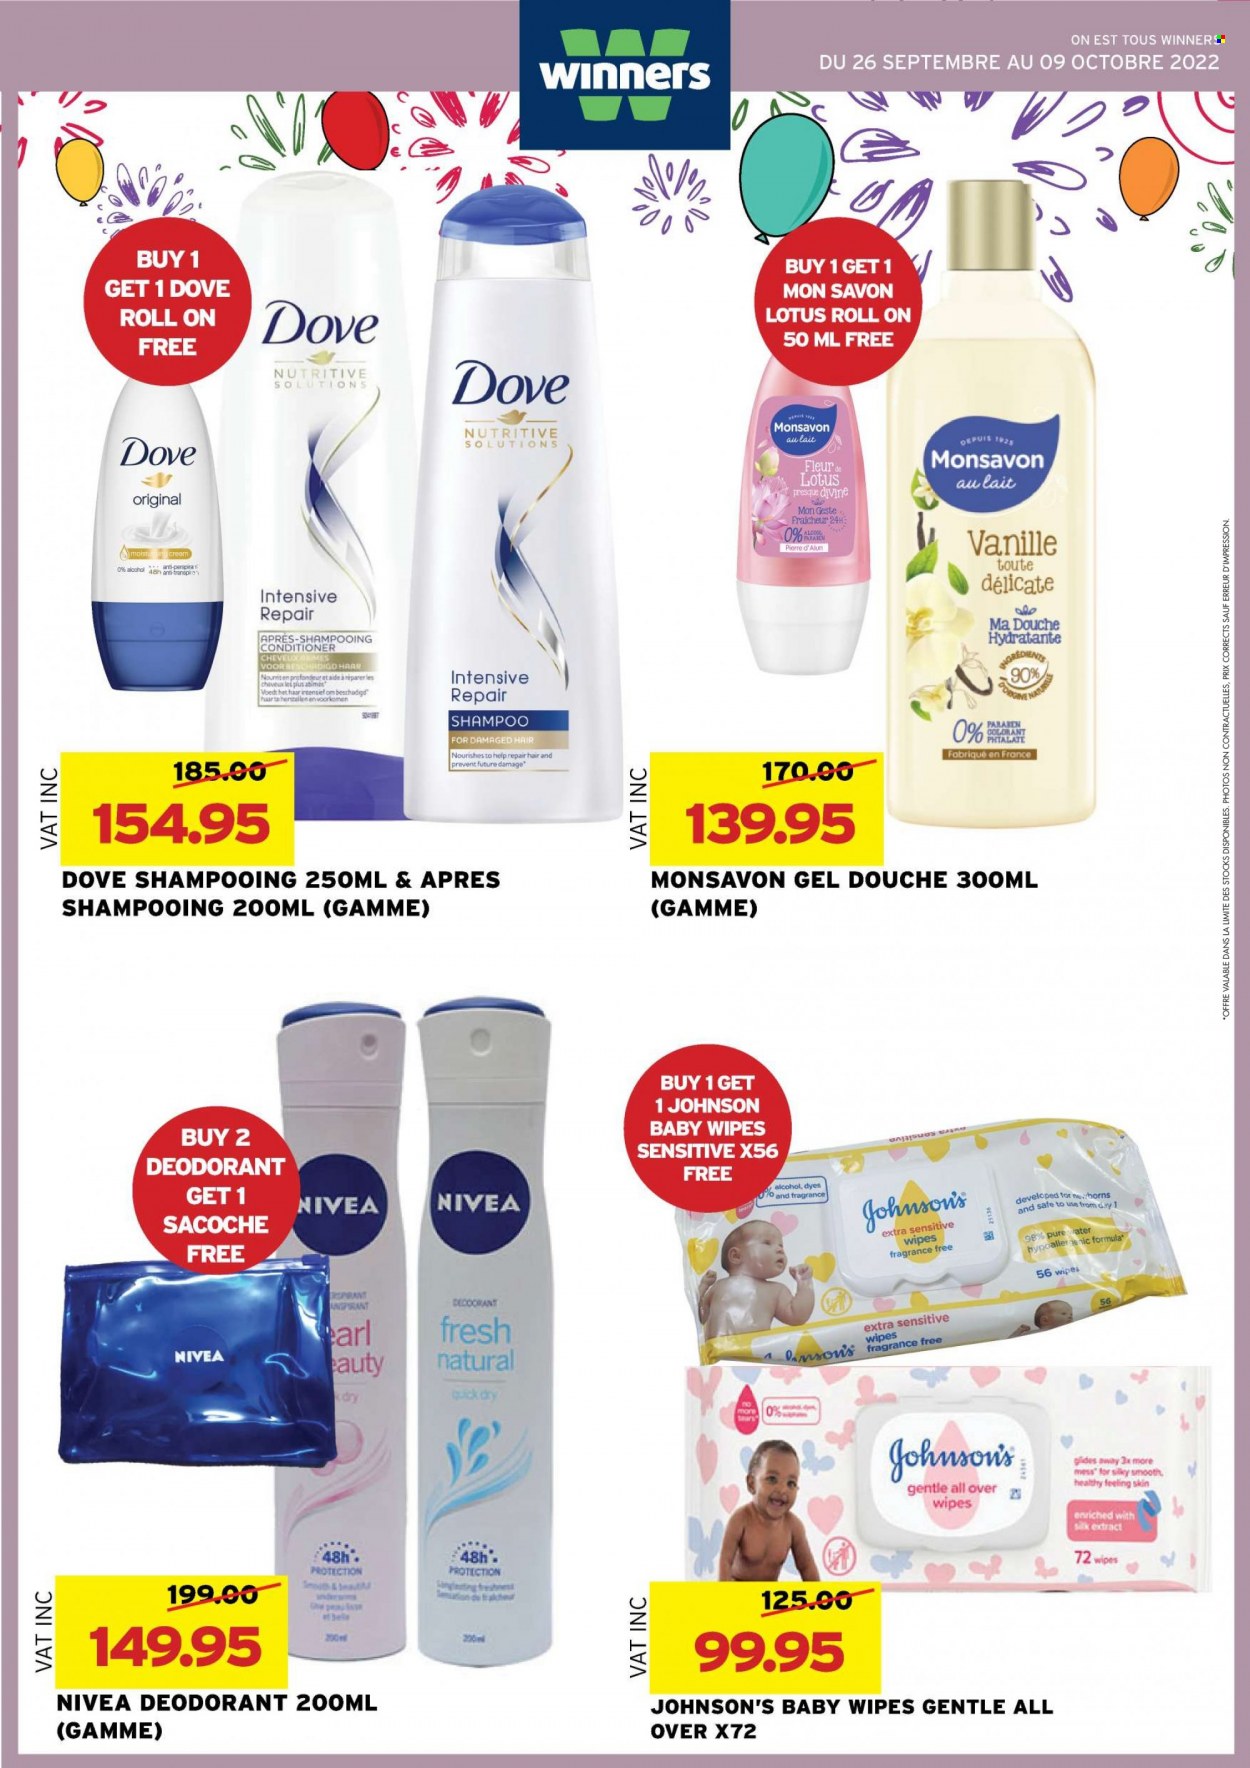 thumbnail - Winner's Catalogue - 26.09.2022 - 9.10.2022 - Sales products - Silk, Dove, purified water, alcohol, wipes, baby wipes, Johnson's, Nivea, conditioner, anti-perspirant, roll-on, Lotus, shampoo, deodorant. Page 35.